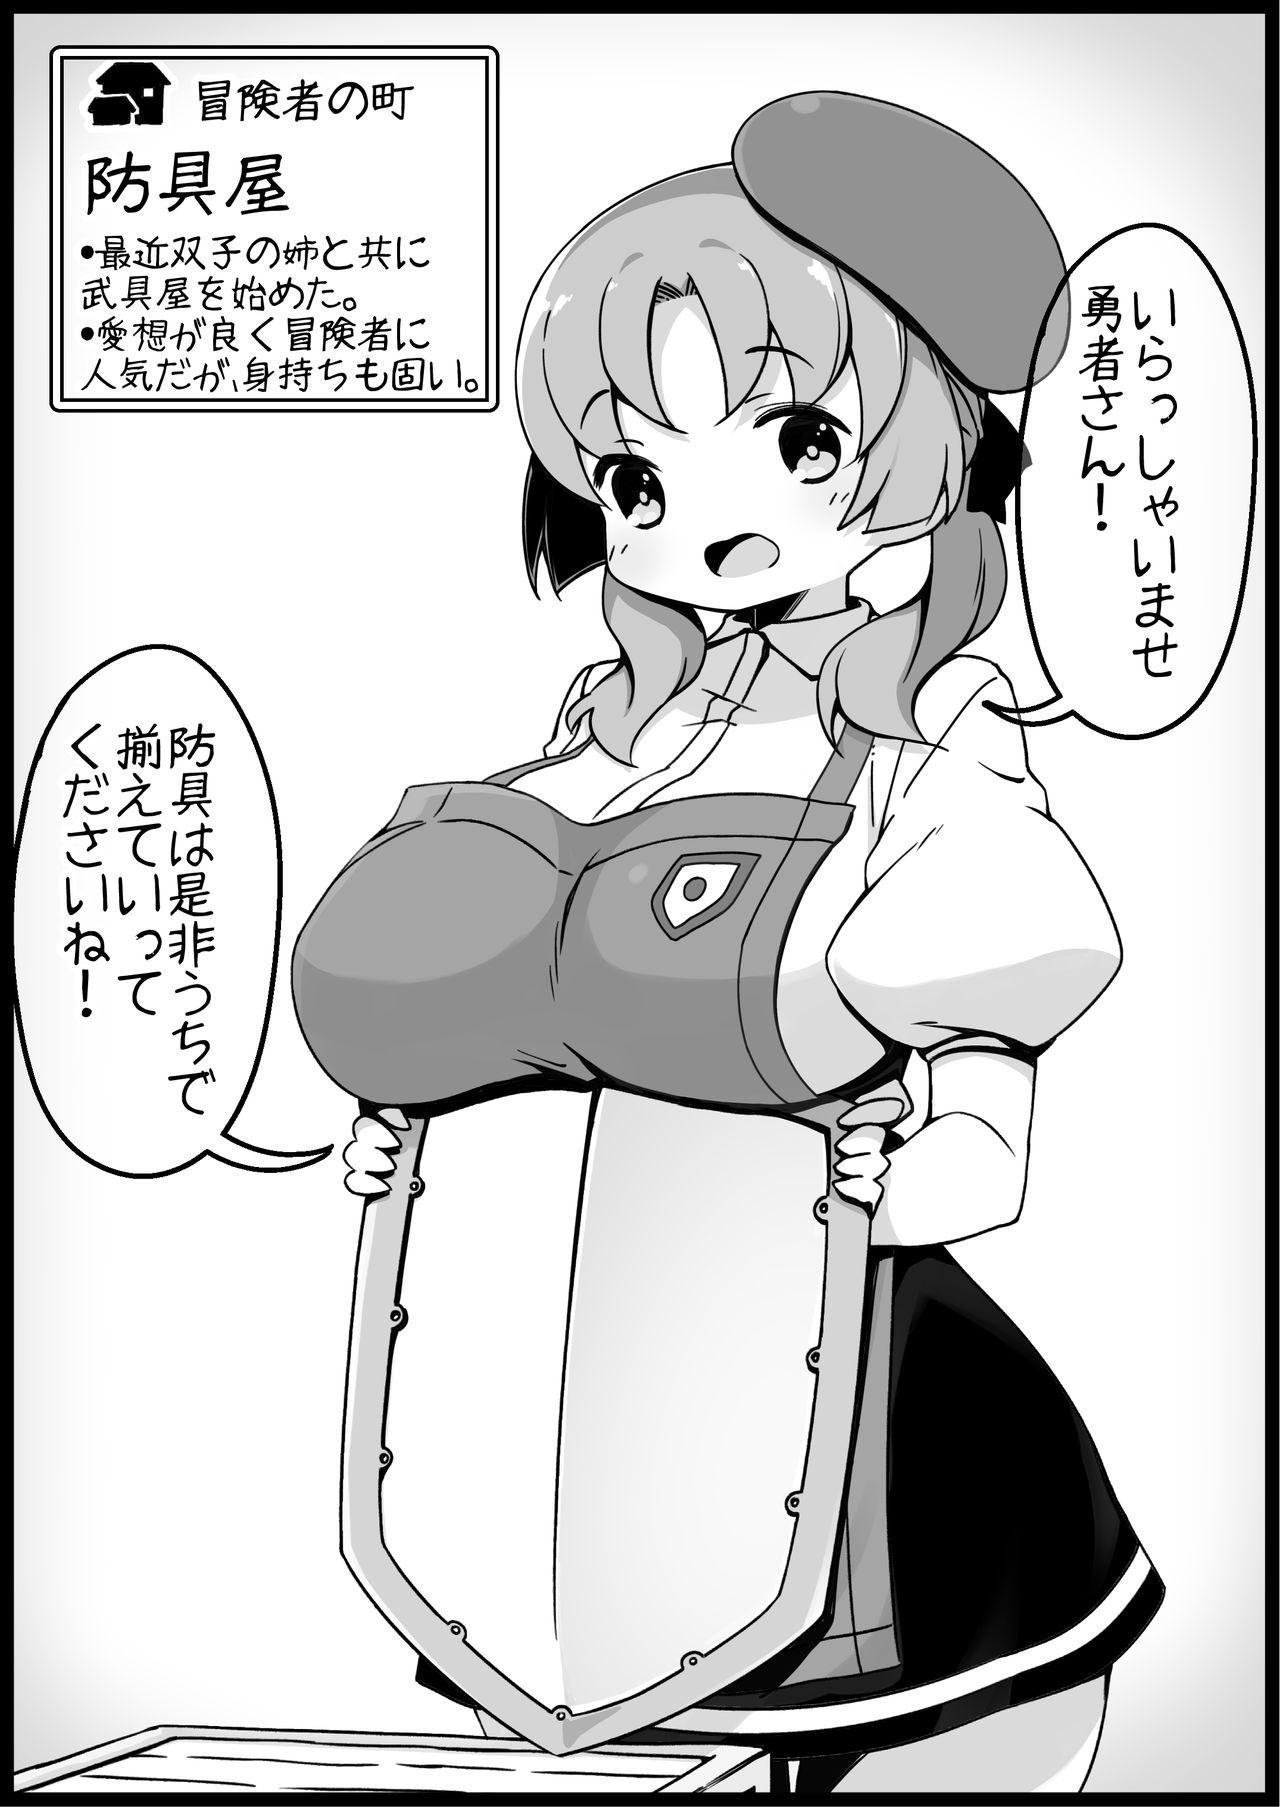 [Succubus Egg] Fantasy World 2 Too Forgiving to Heroes-Continued NPC (mob) Opponent-Centered Short H Manga Collection- 1